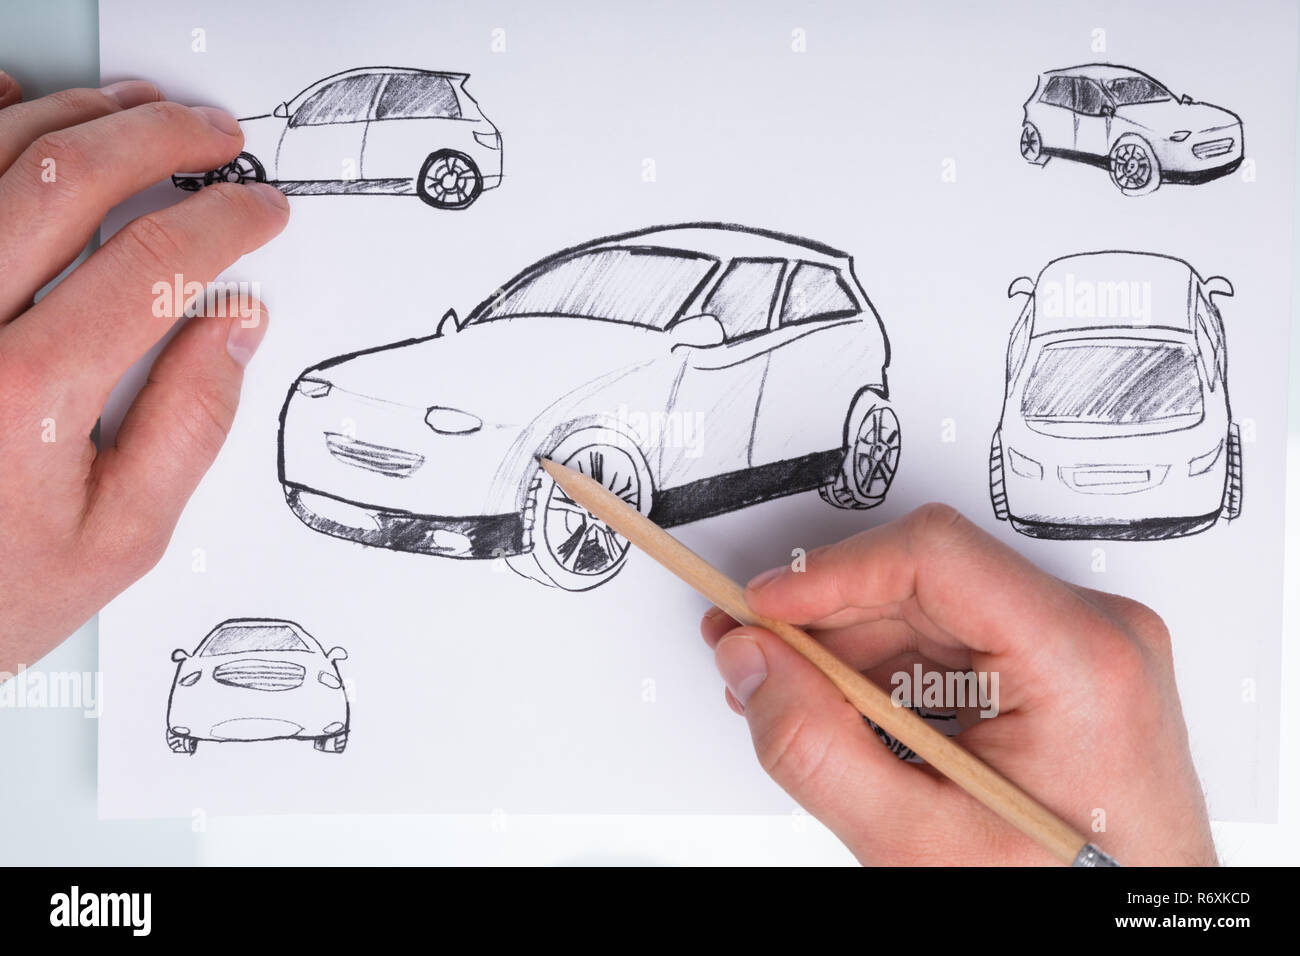 Human Hand Drawing Sketch Of A Car Stock Photo